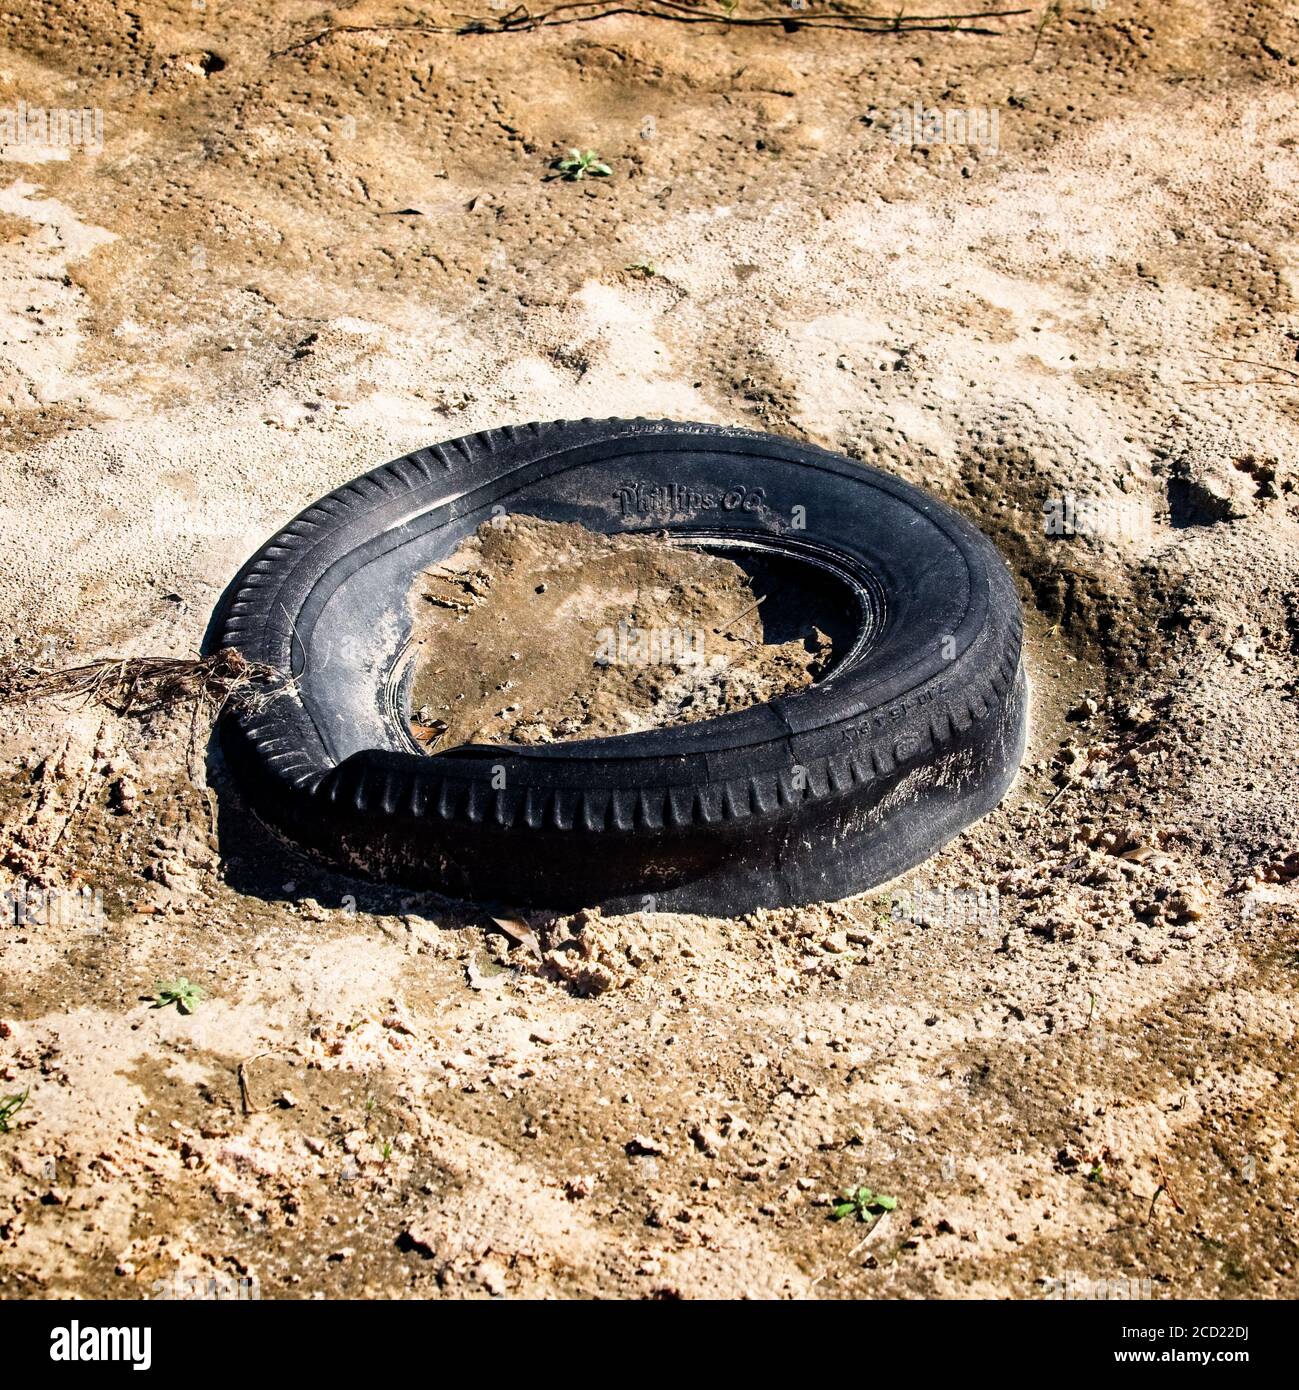 The Woodlands TX USA - 01-20-2020 - Old tire In Sandbed Banque D'Images